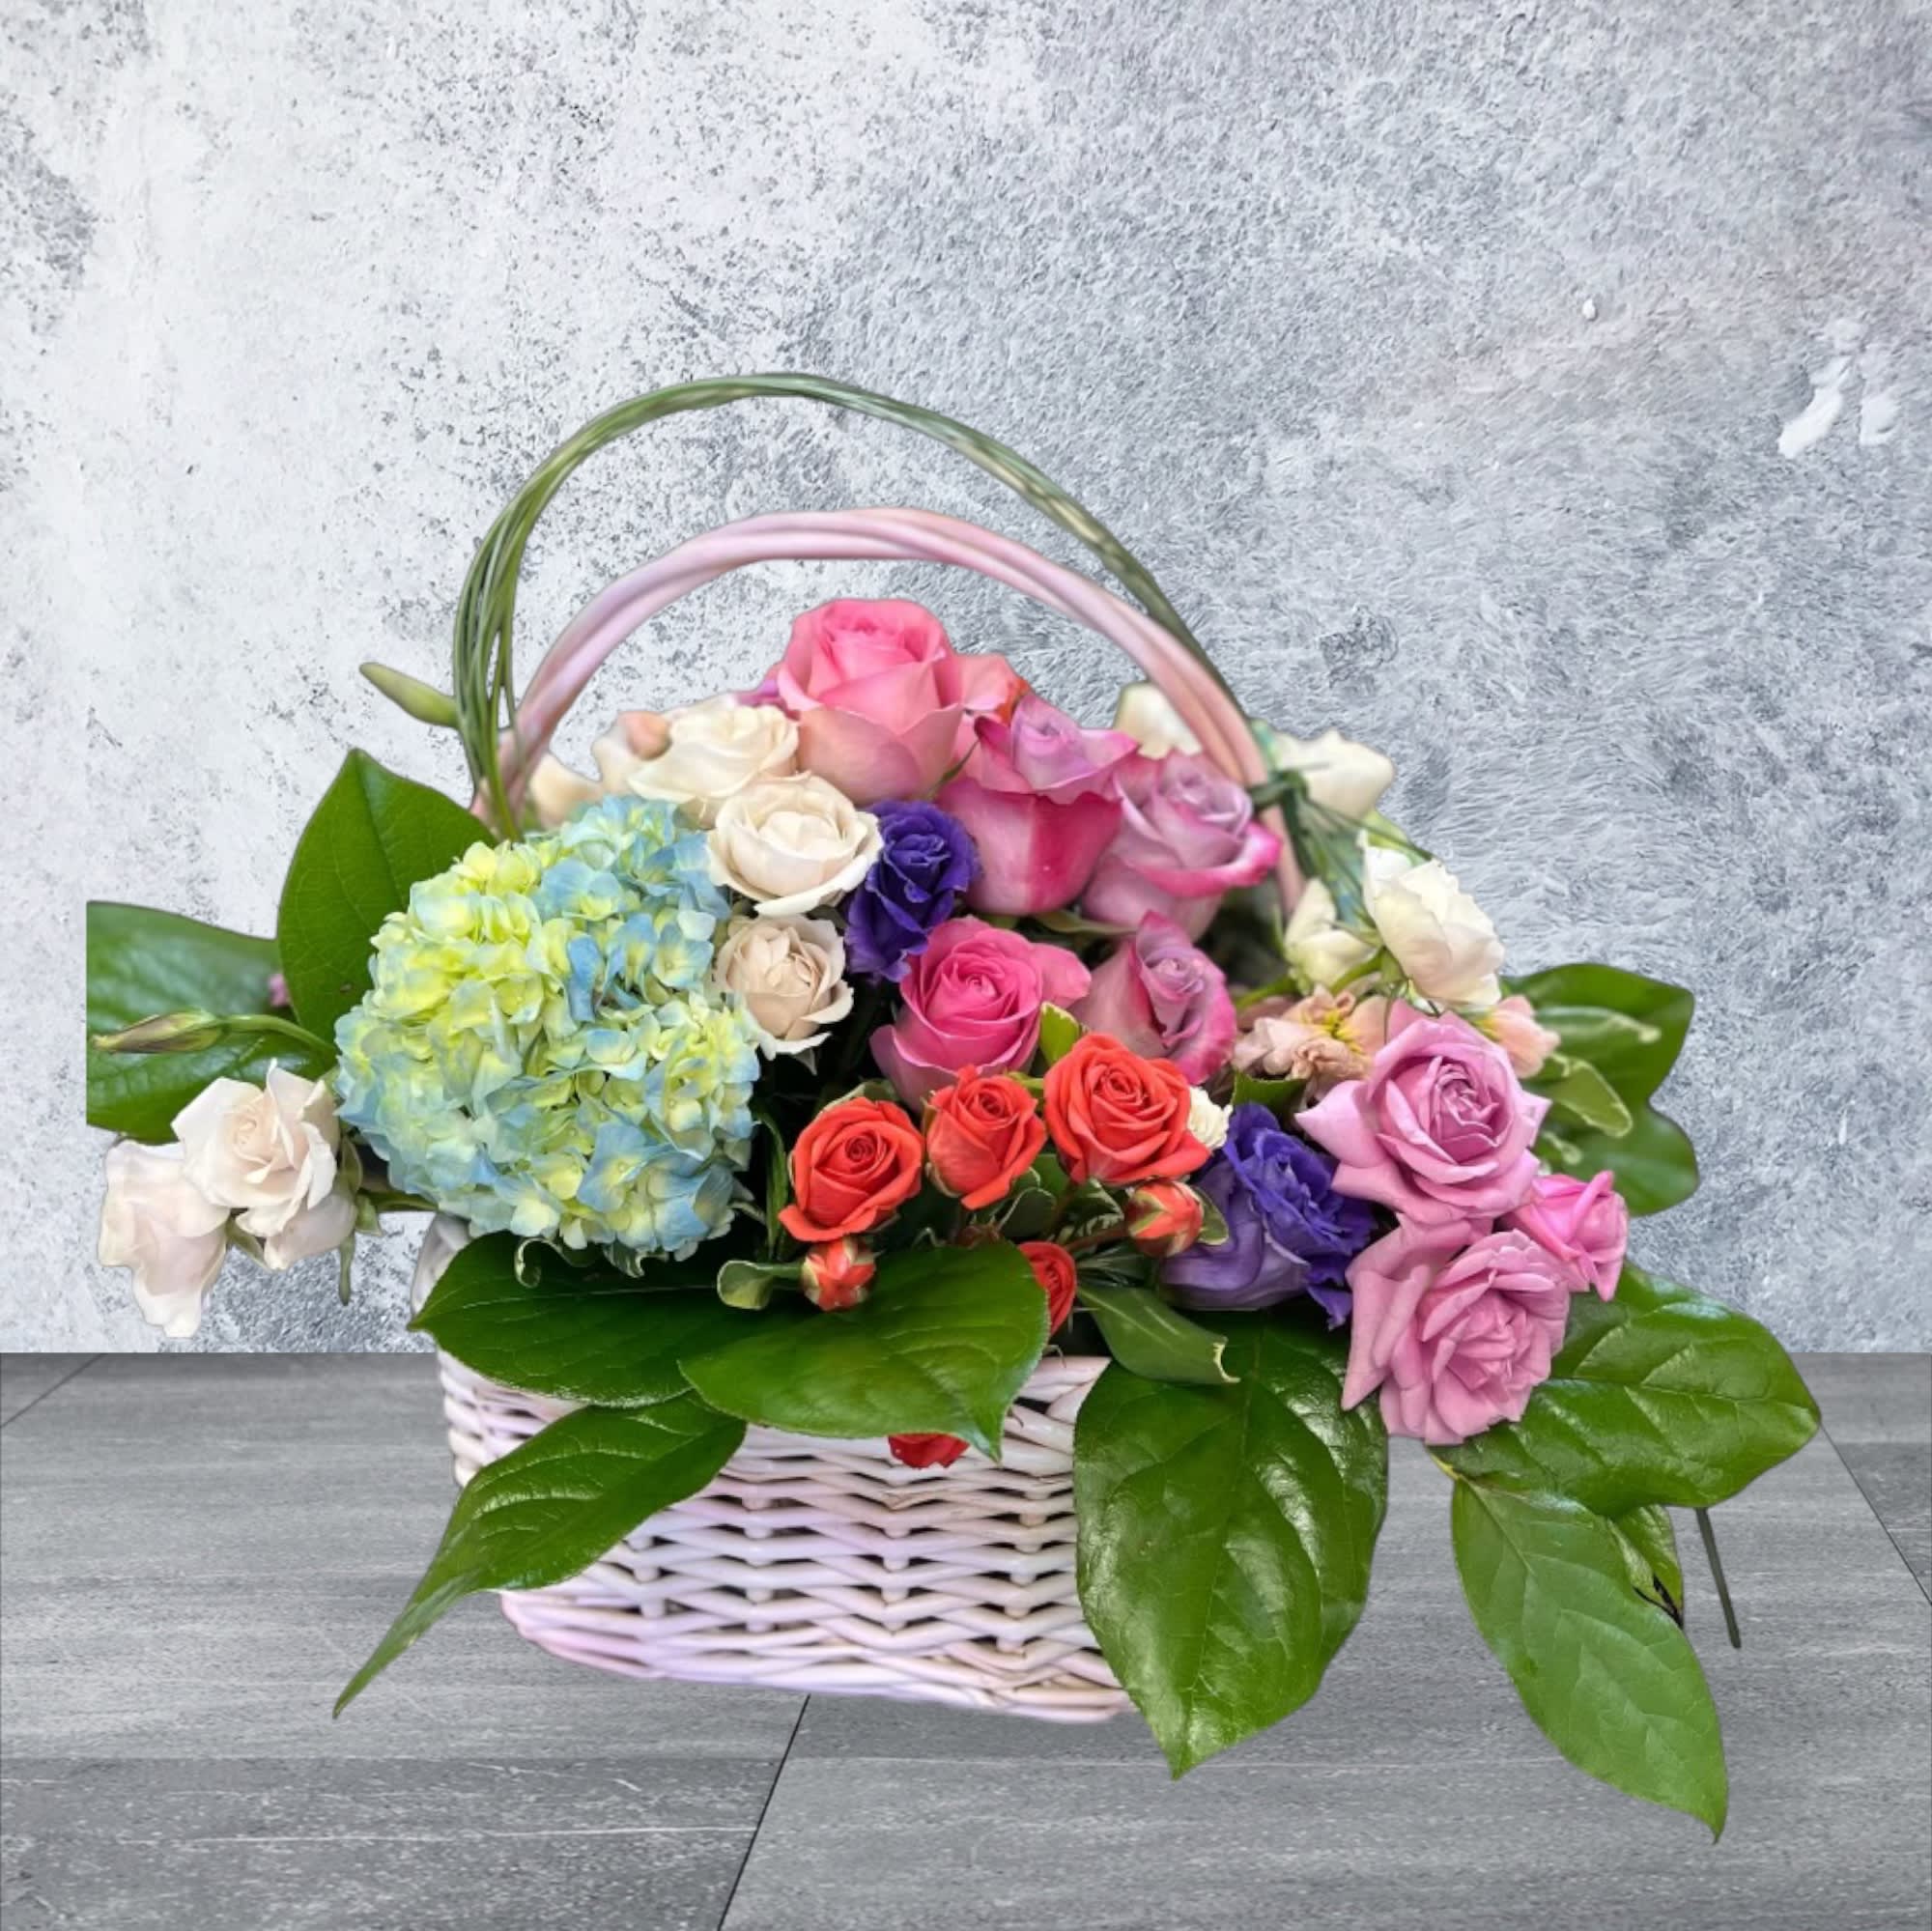 Happiness - Send someone the happiness of this basket. Beautiful basket of roses and hydrangeas designed in a basket. 